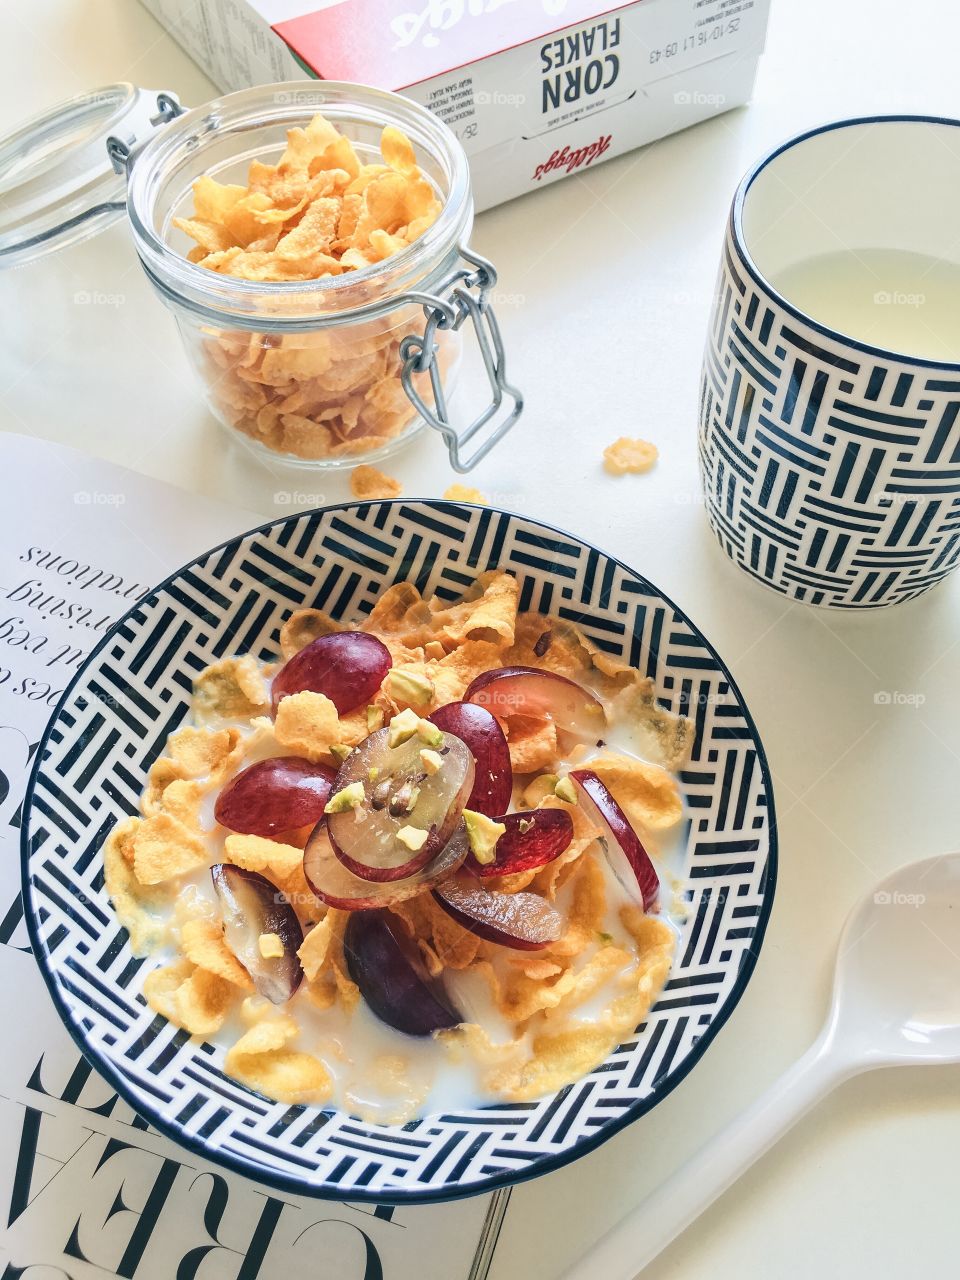 Reimagining cereal : Breakfast bowl with Kellogg's Corn flakes.
(Ingredients : Kellogg's Corn flakes, milk, and grapes sprinkling with pistachios.)
